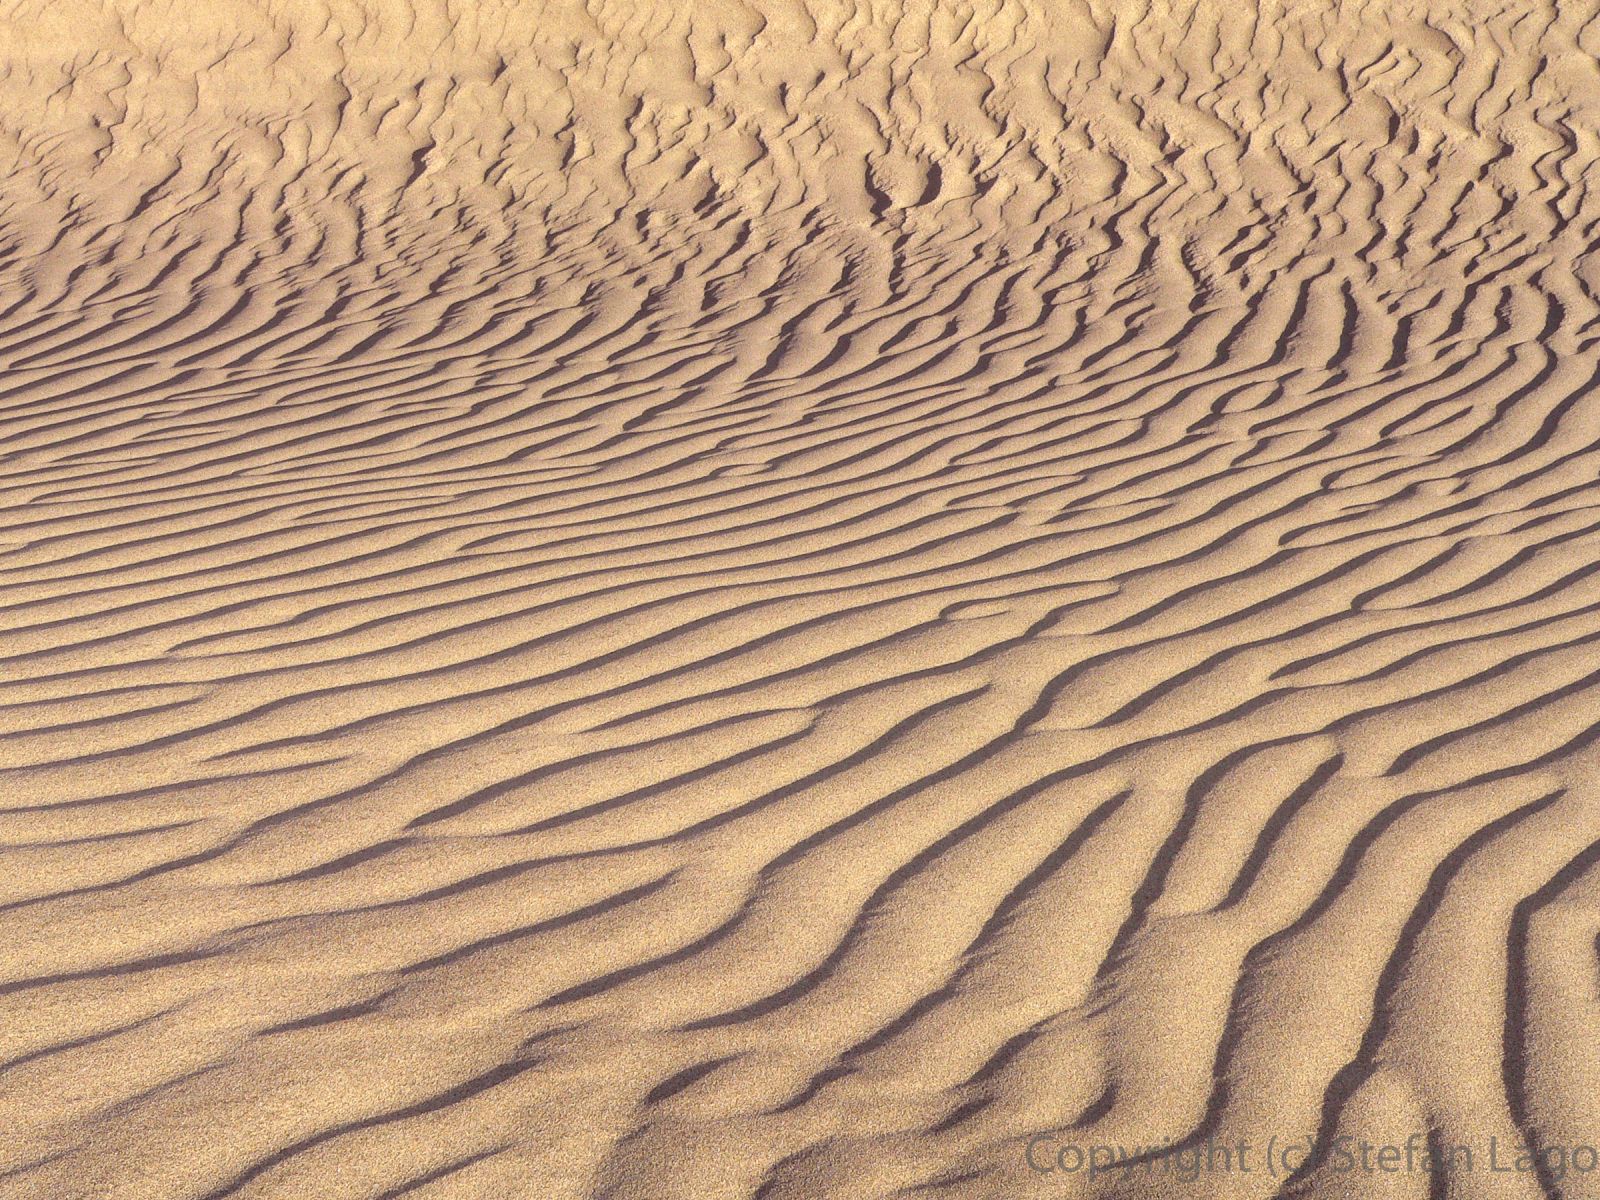 Windformed patterns in the dunes of Maspalomas, Gran Canaria.(2560 x 1920 px)